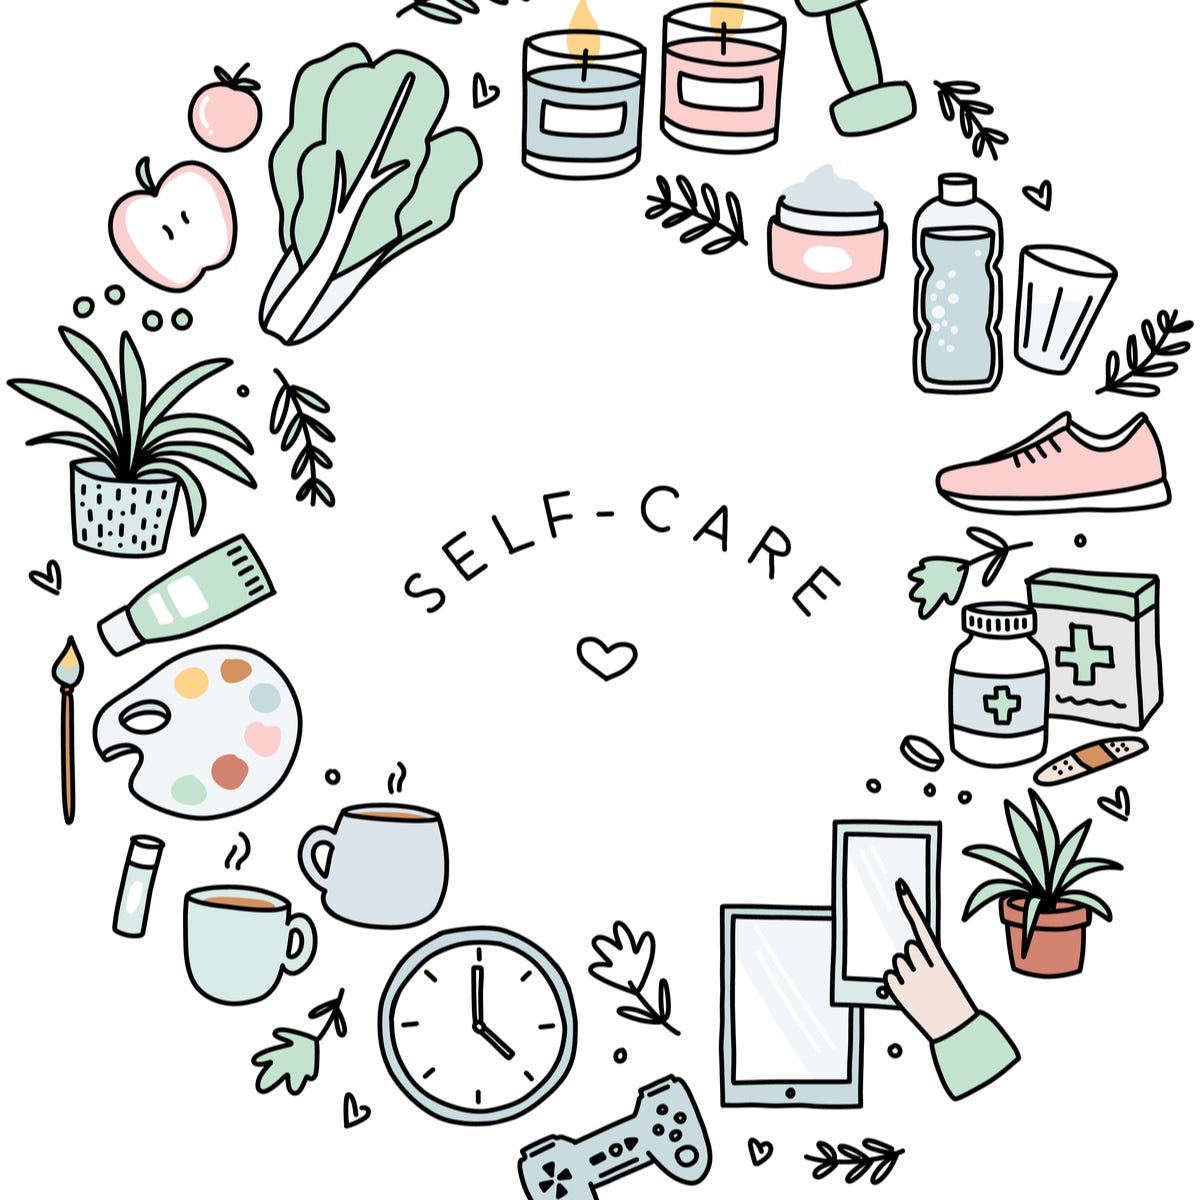 Self care icon shape. Hand drawn vector illustrations. Bold lines. Includes relaxing, exercising, eating well, health, happiness, motivation, candles, hydration, pets and more